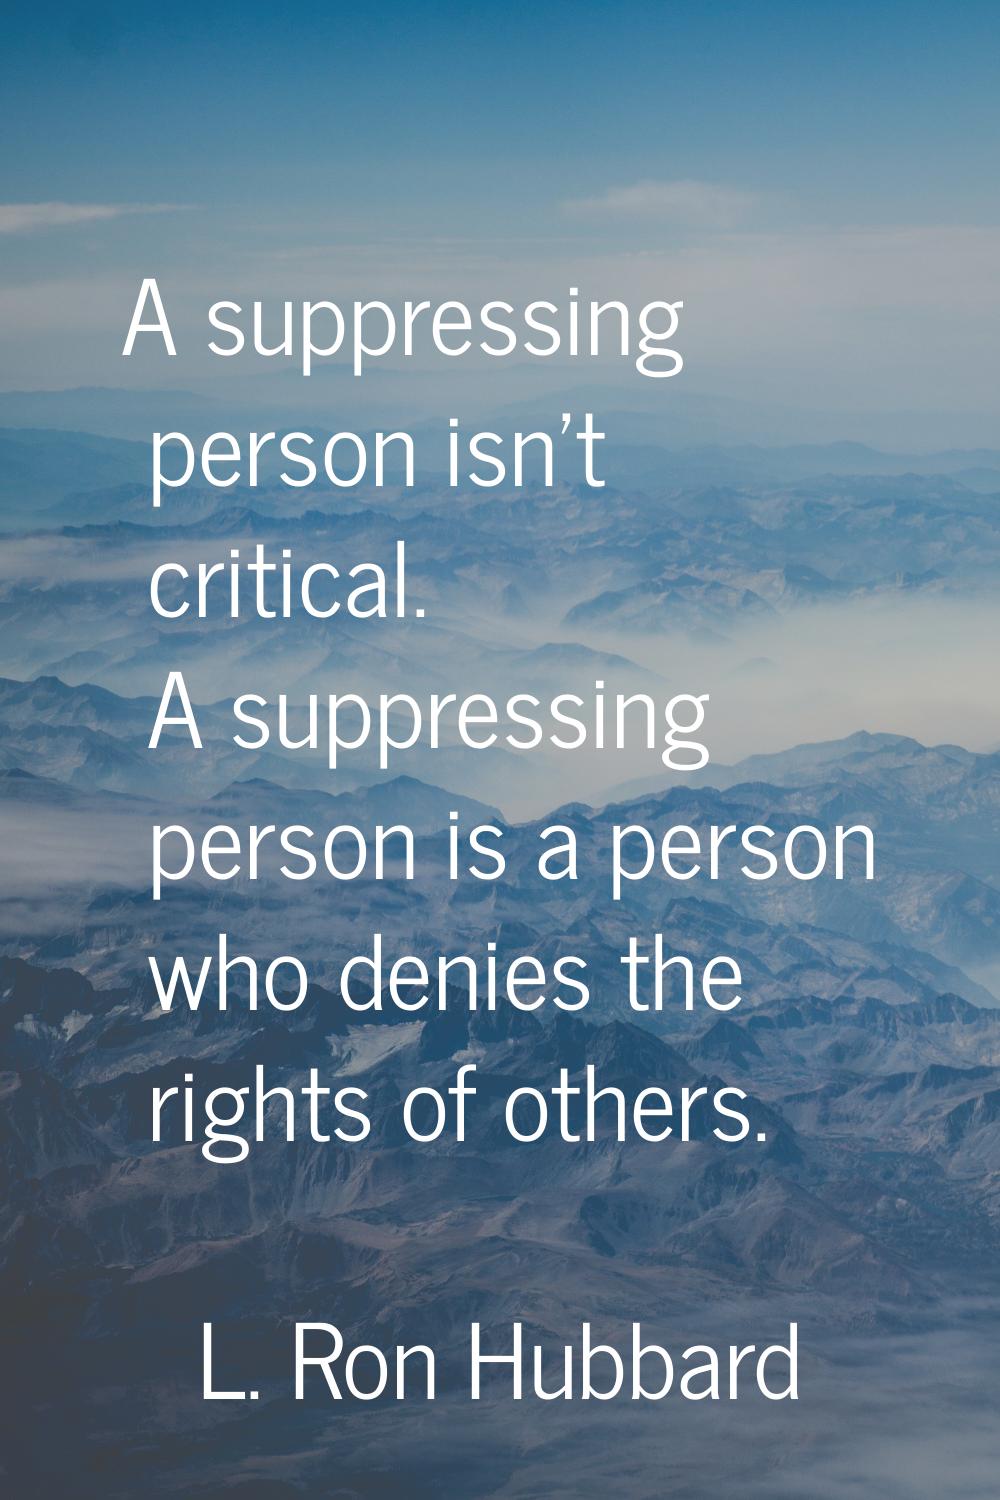 A suppressing person isn't critical. A suppressing person is a person who denies the rights of othe